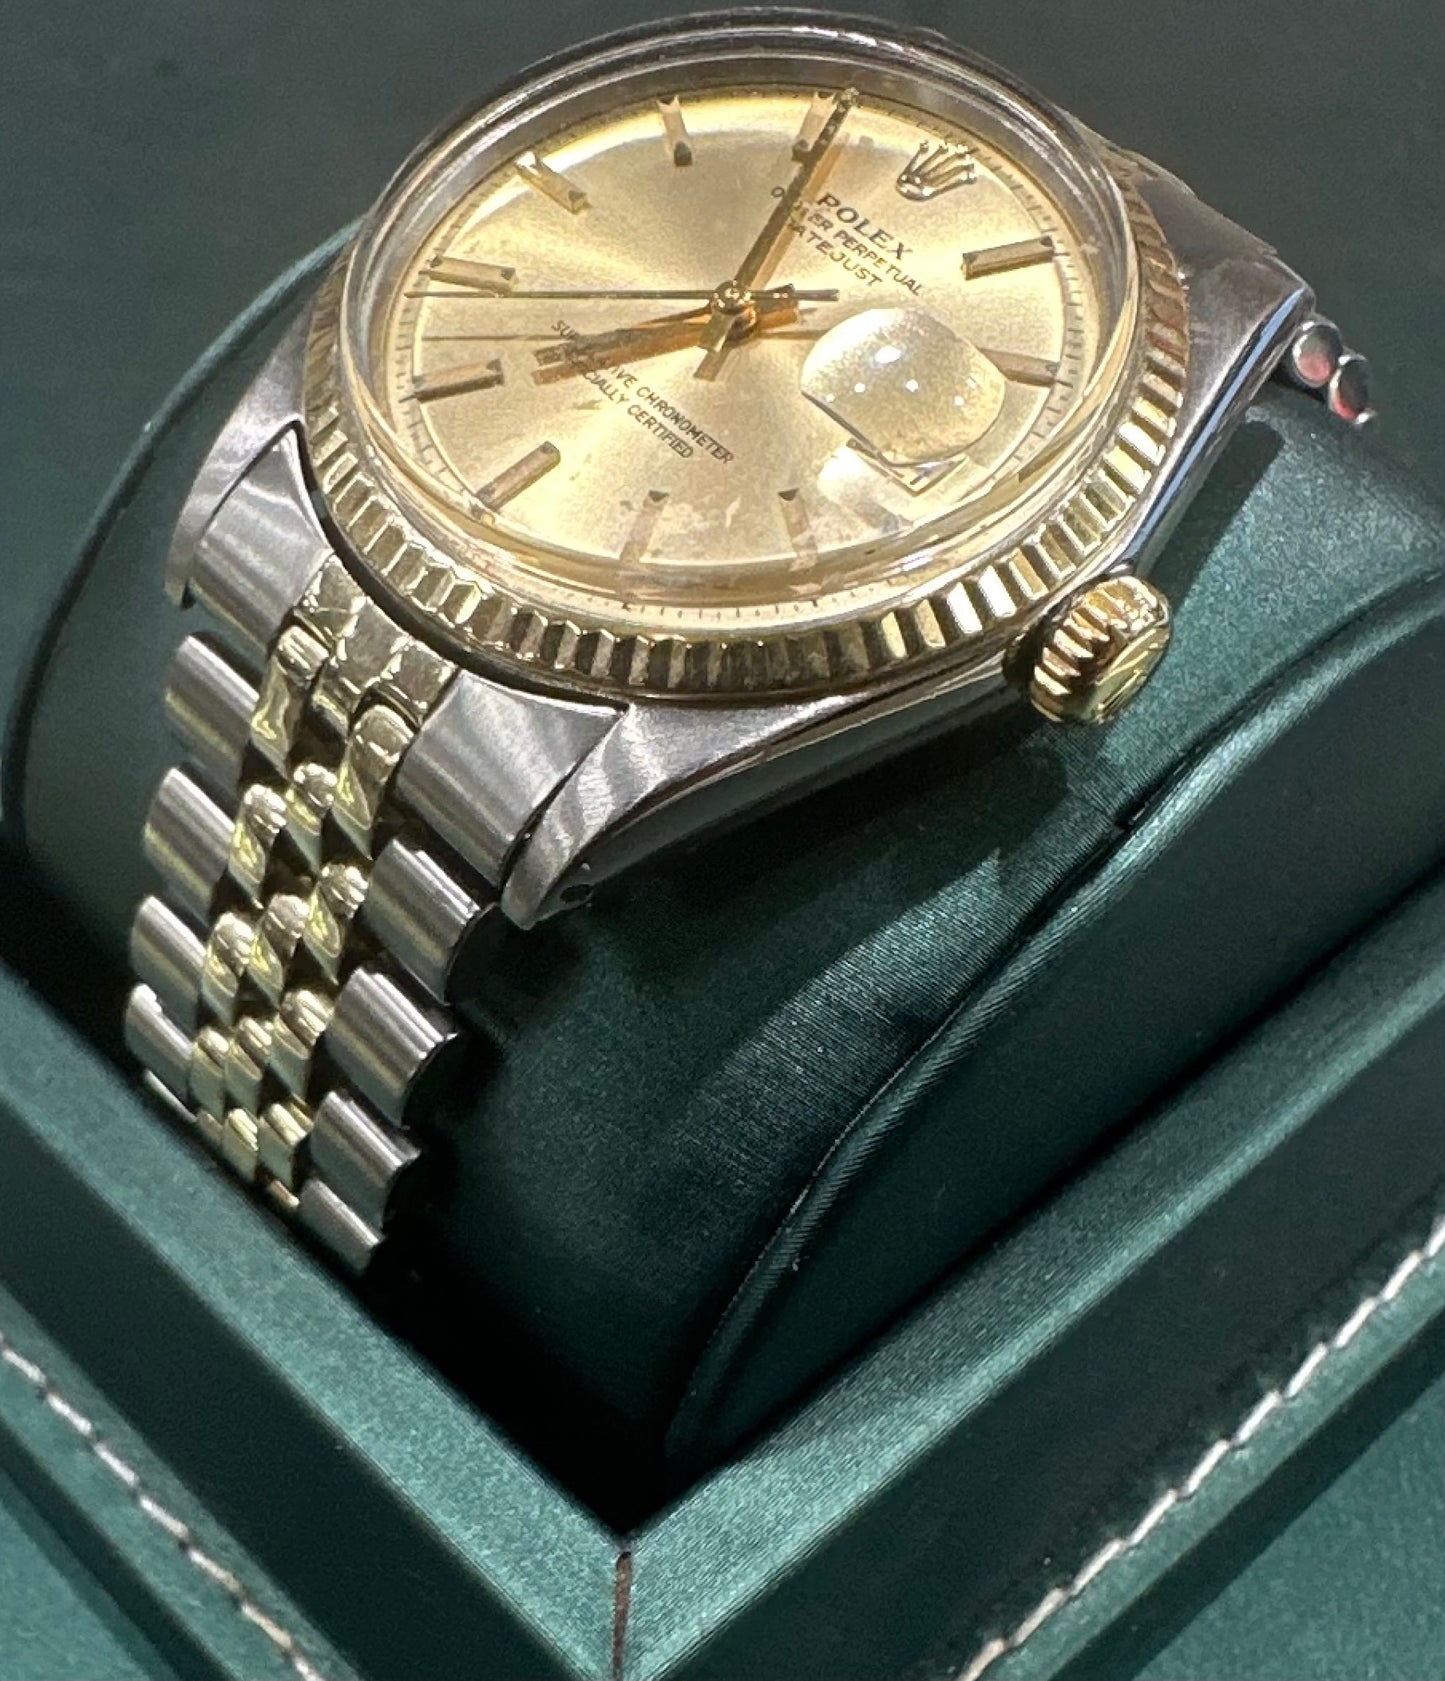 Rolex date jus 36mm two tone